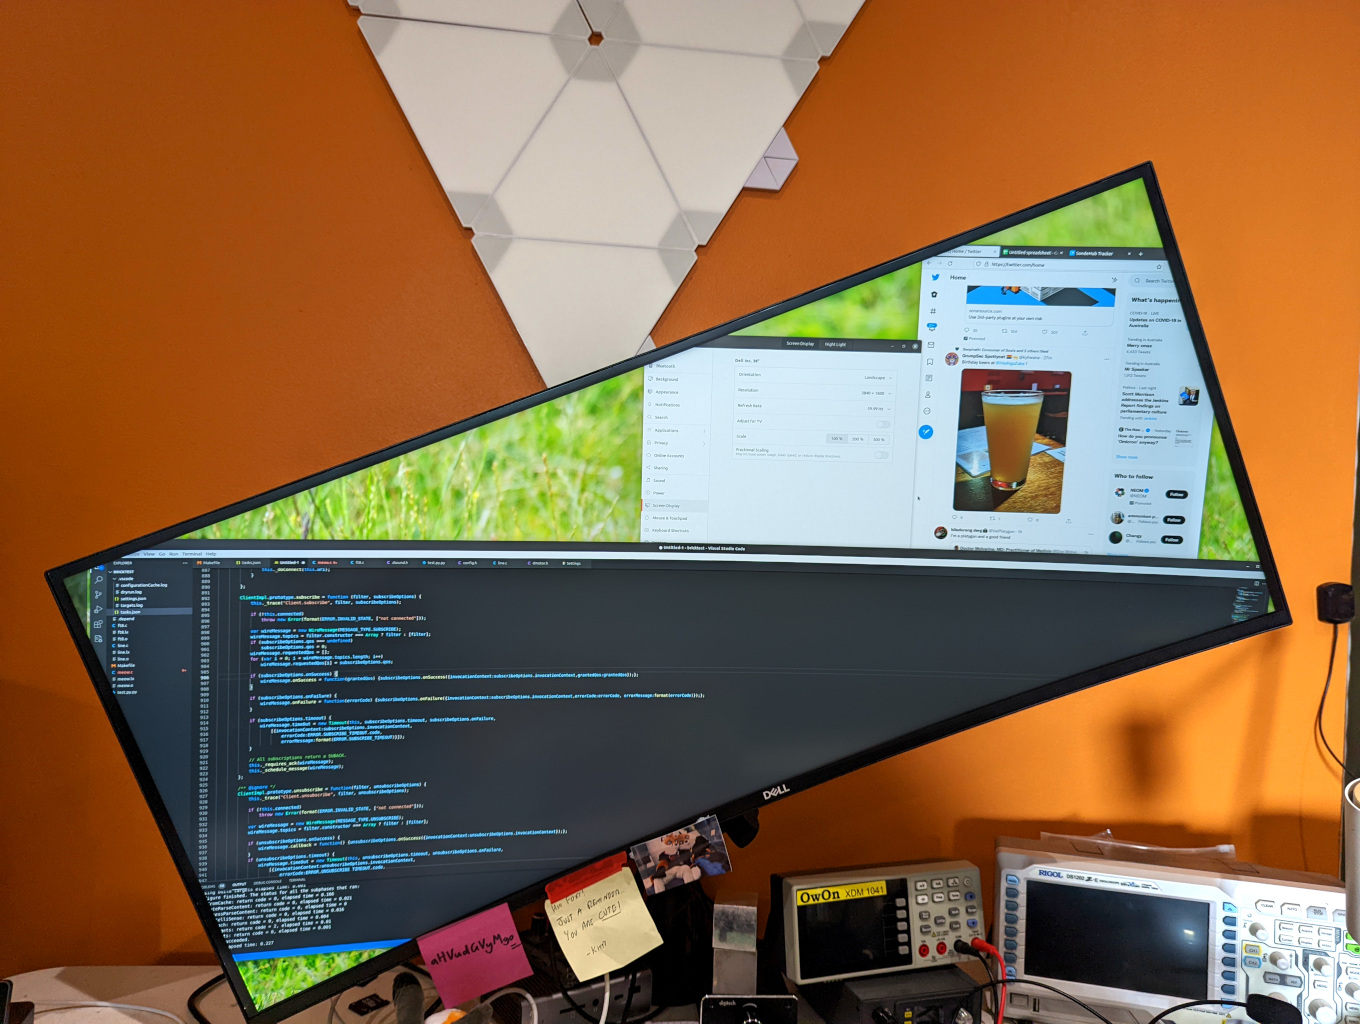 Monitor with a 22 degree rotation